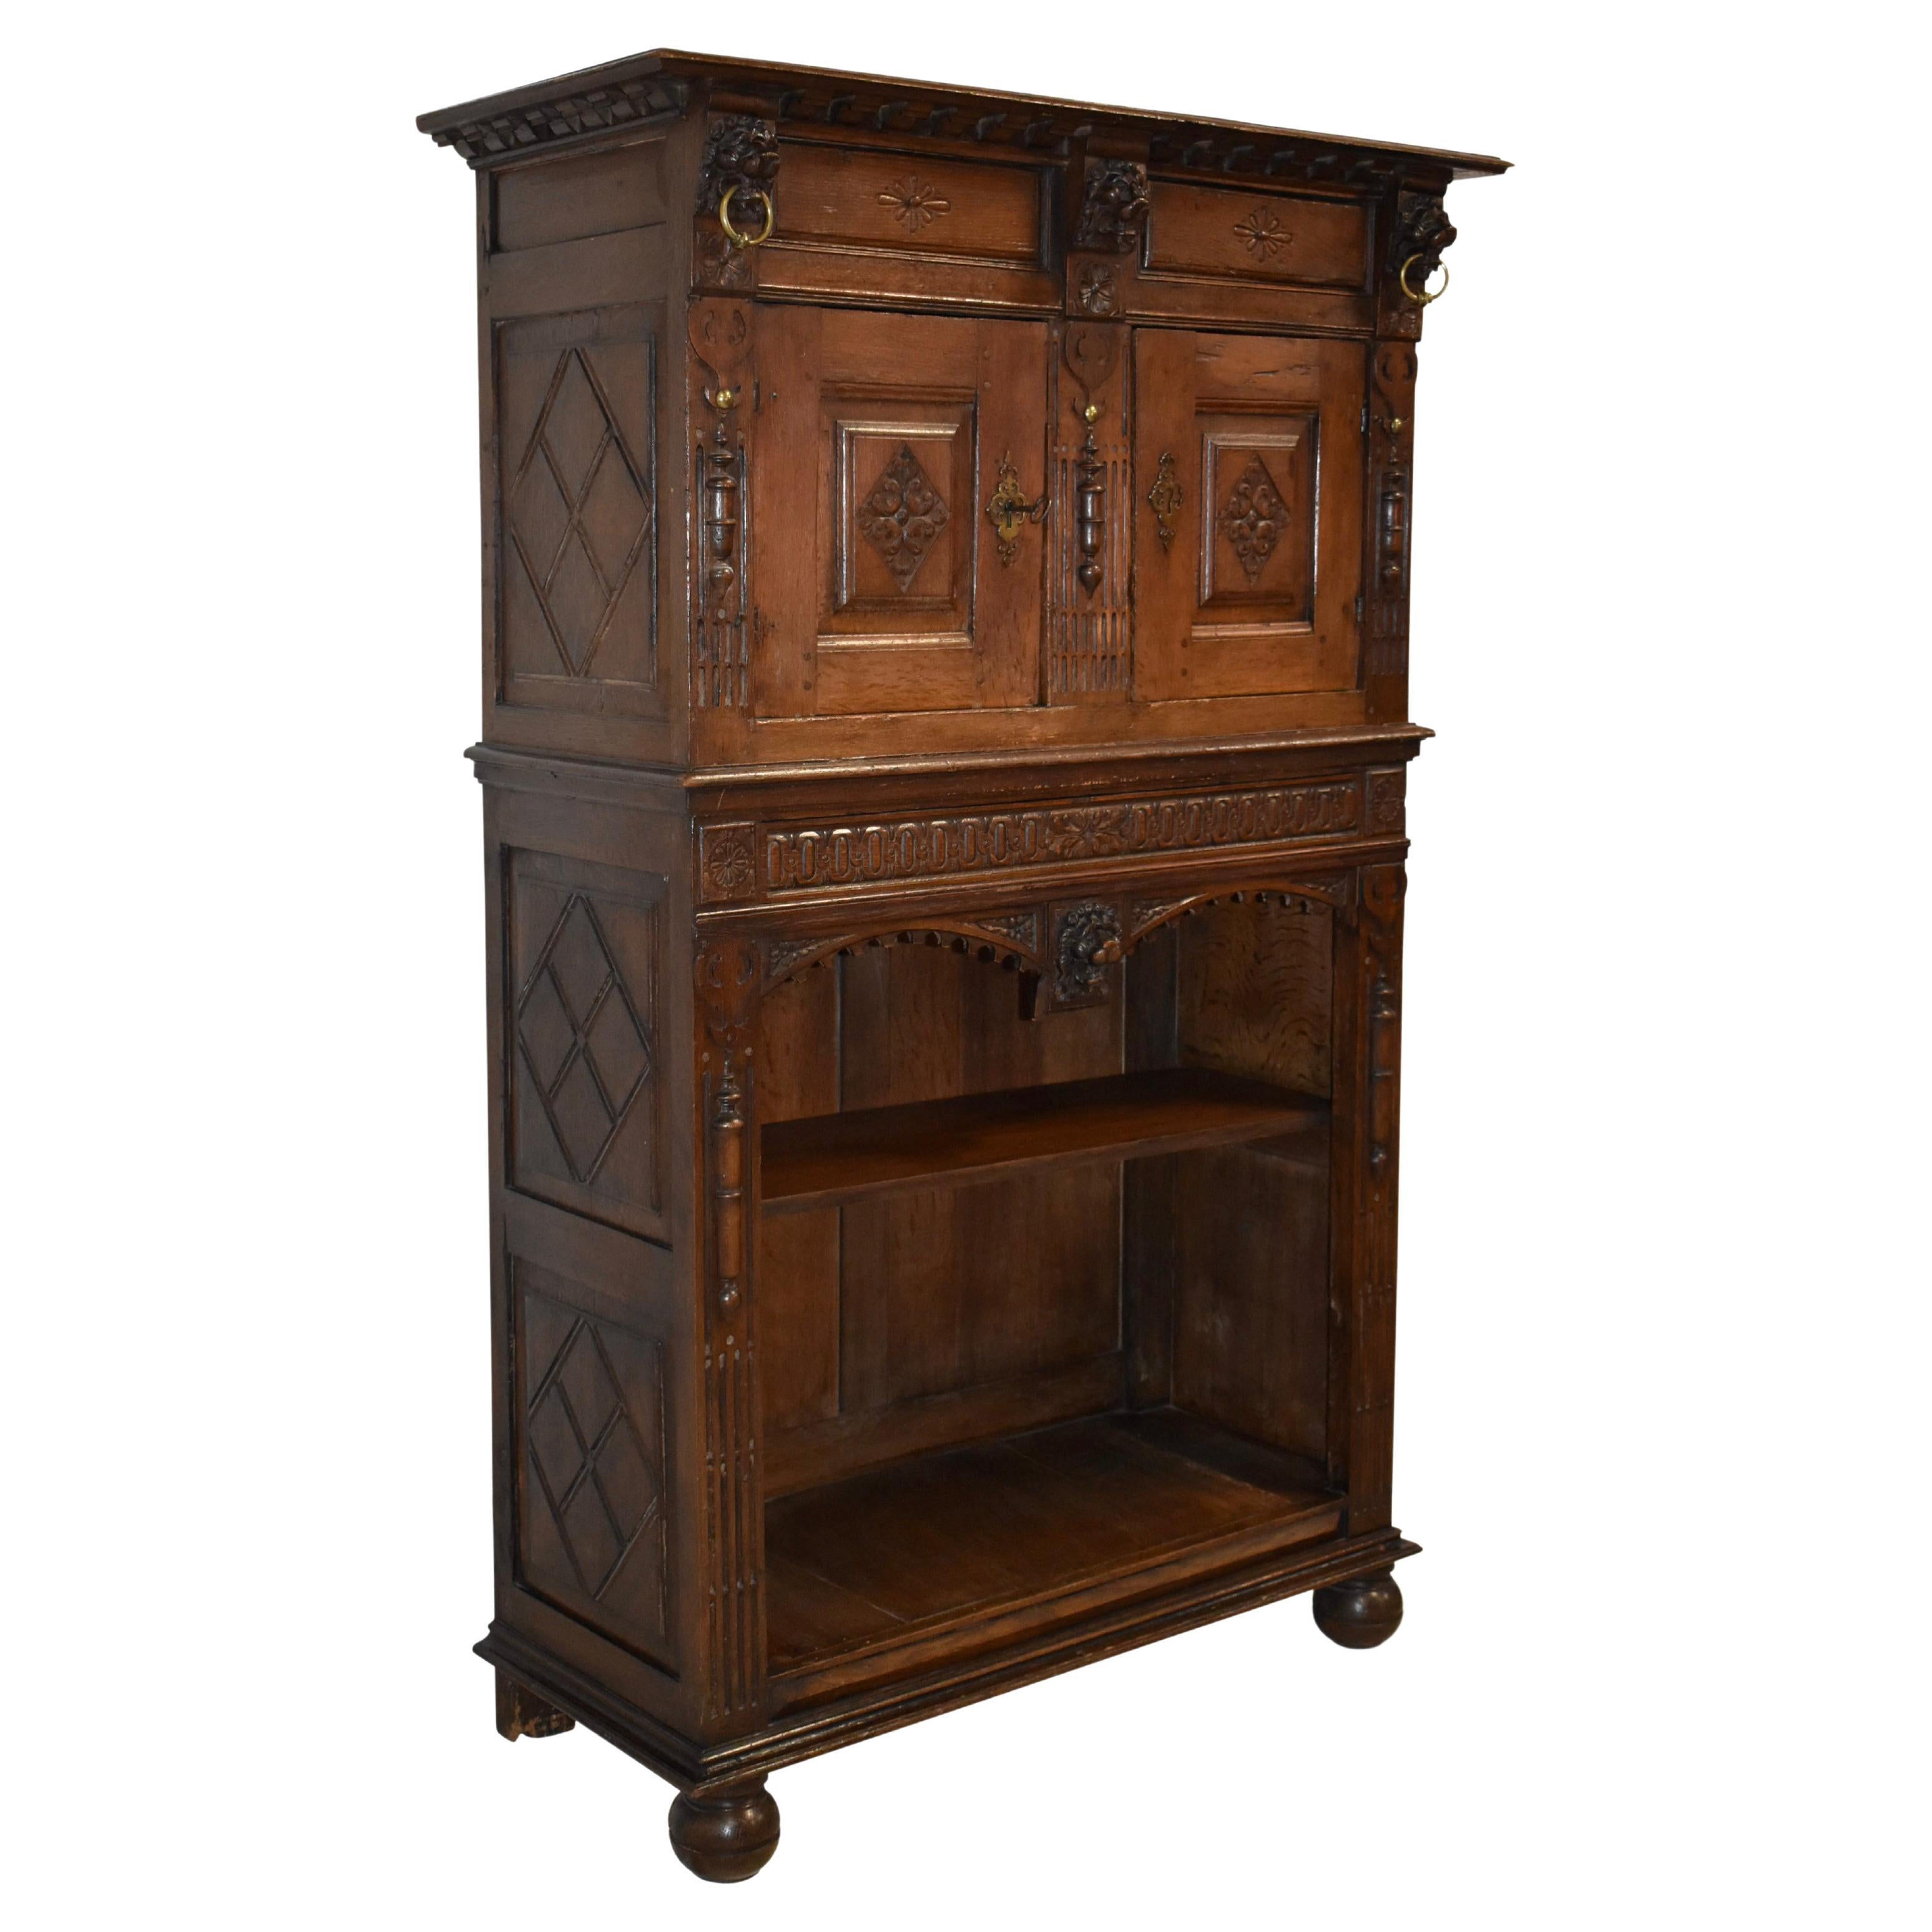 Carved Oak Cabinet with Lion Mask Carvings, circa 1850